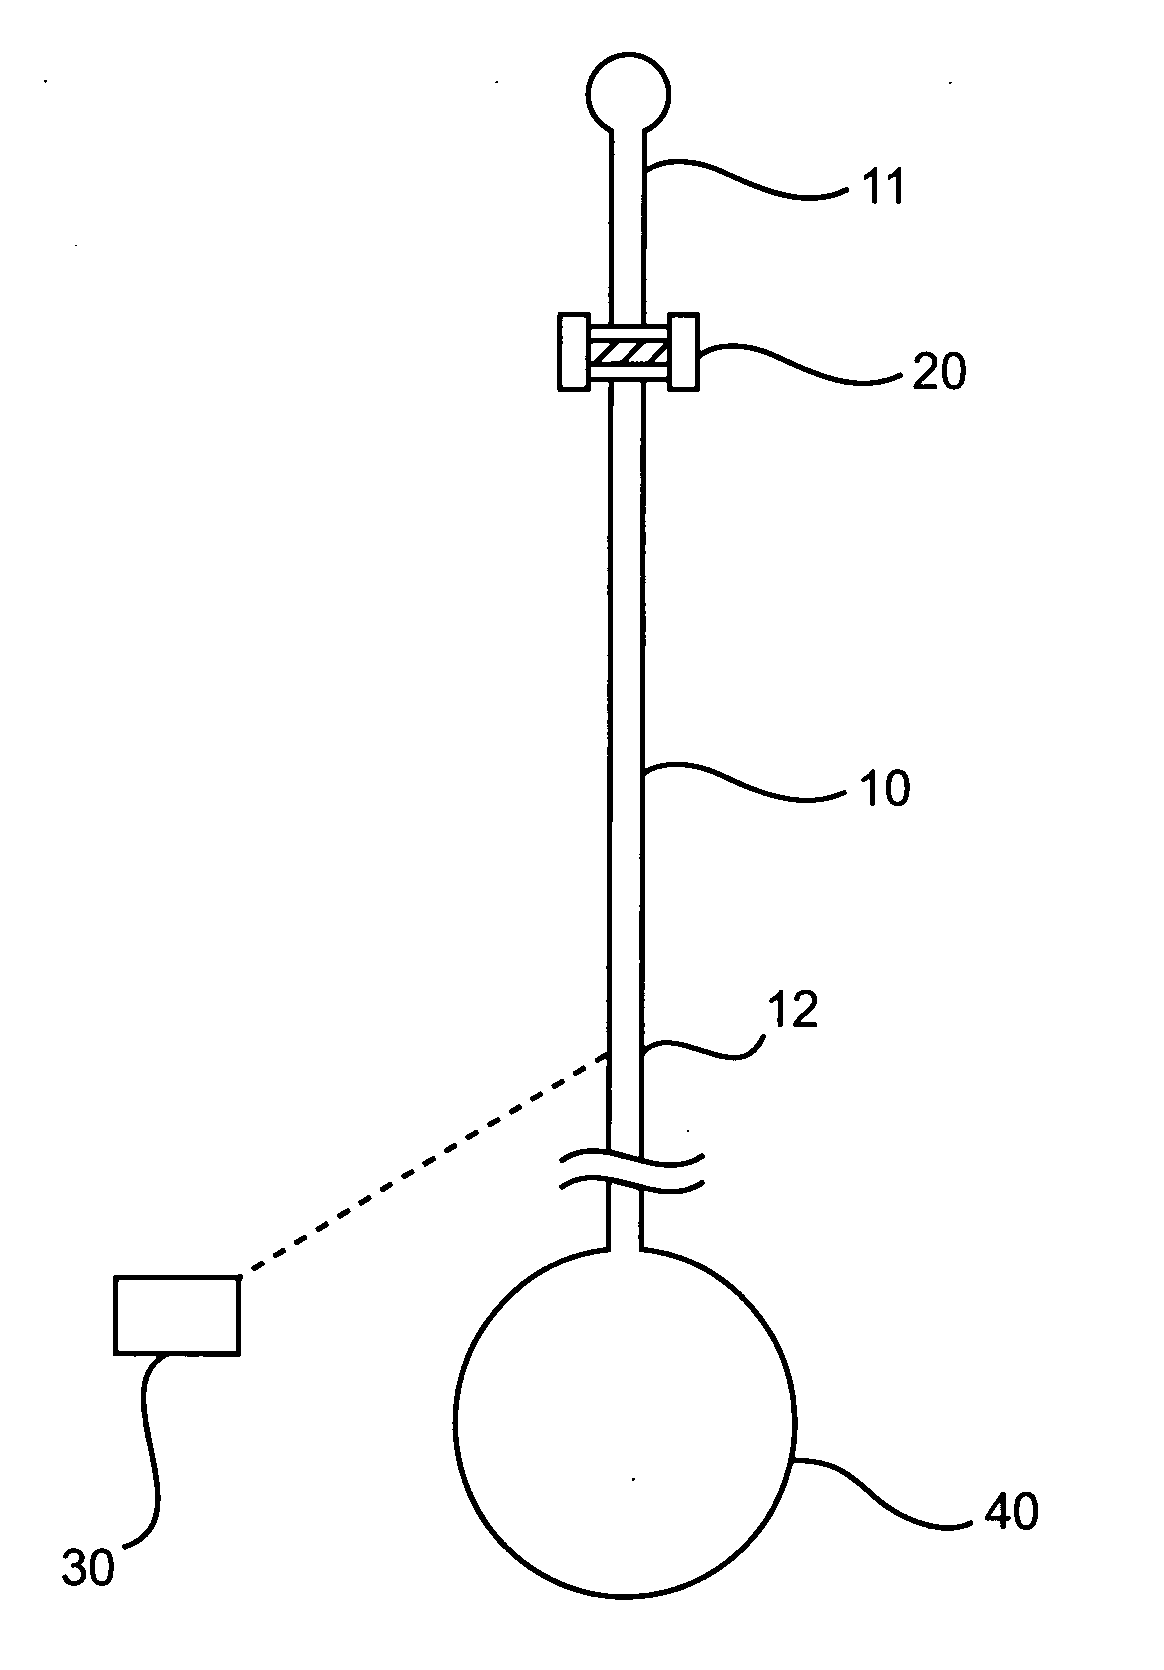 Catheter system for minimizing retrograde bacterial transmission from a catheter tubing